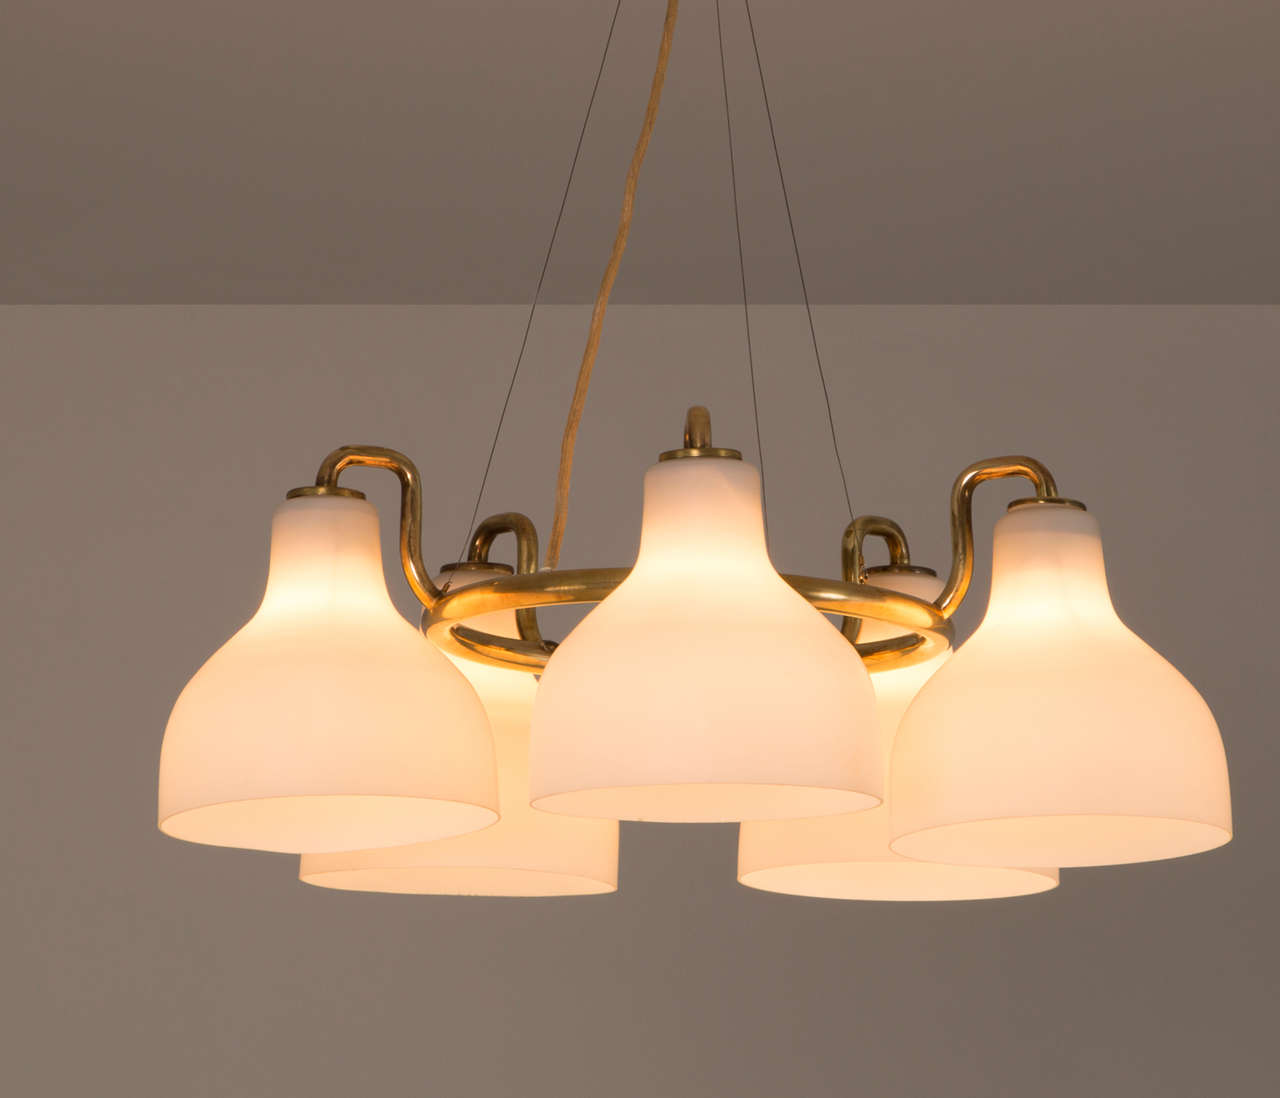 Chandelier, in metal and opaline glass, by Vilhelm Lauritzen for Louis Poulsen, Denmark 1950s.

Single chandelier by Vilhelm Lauritzen. The brass finished ring contains five opaline milk glass shades with a matte finish to create an excellent